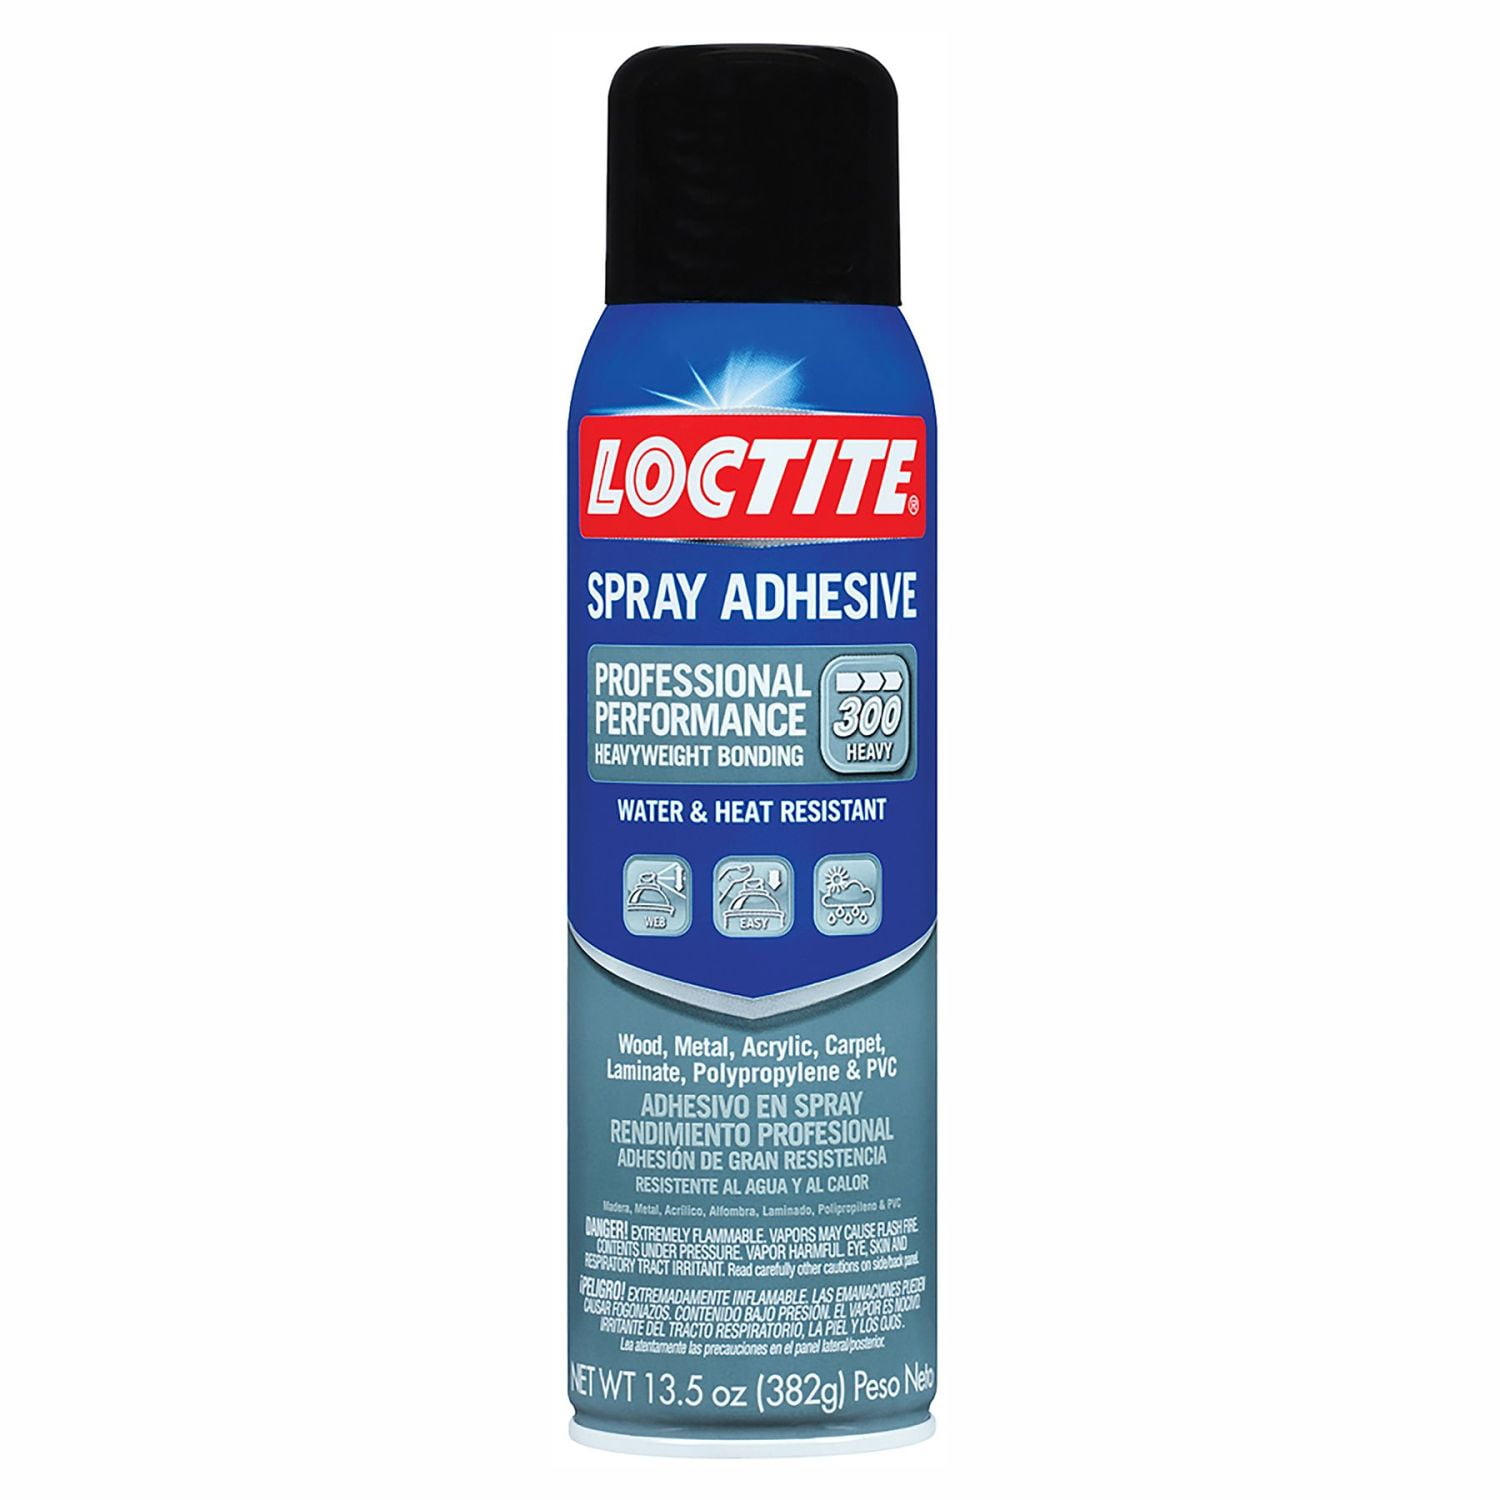 Loctite Professional Performance Spray Adhesive, Pack of 1, Clear